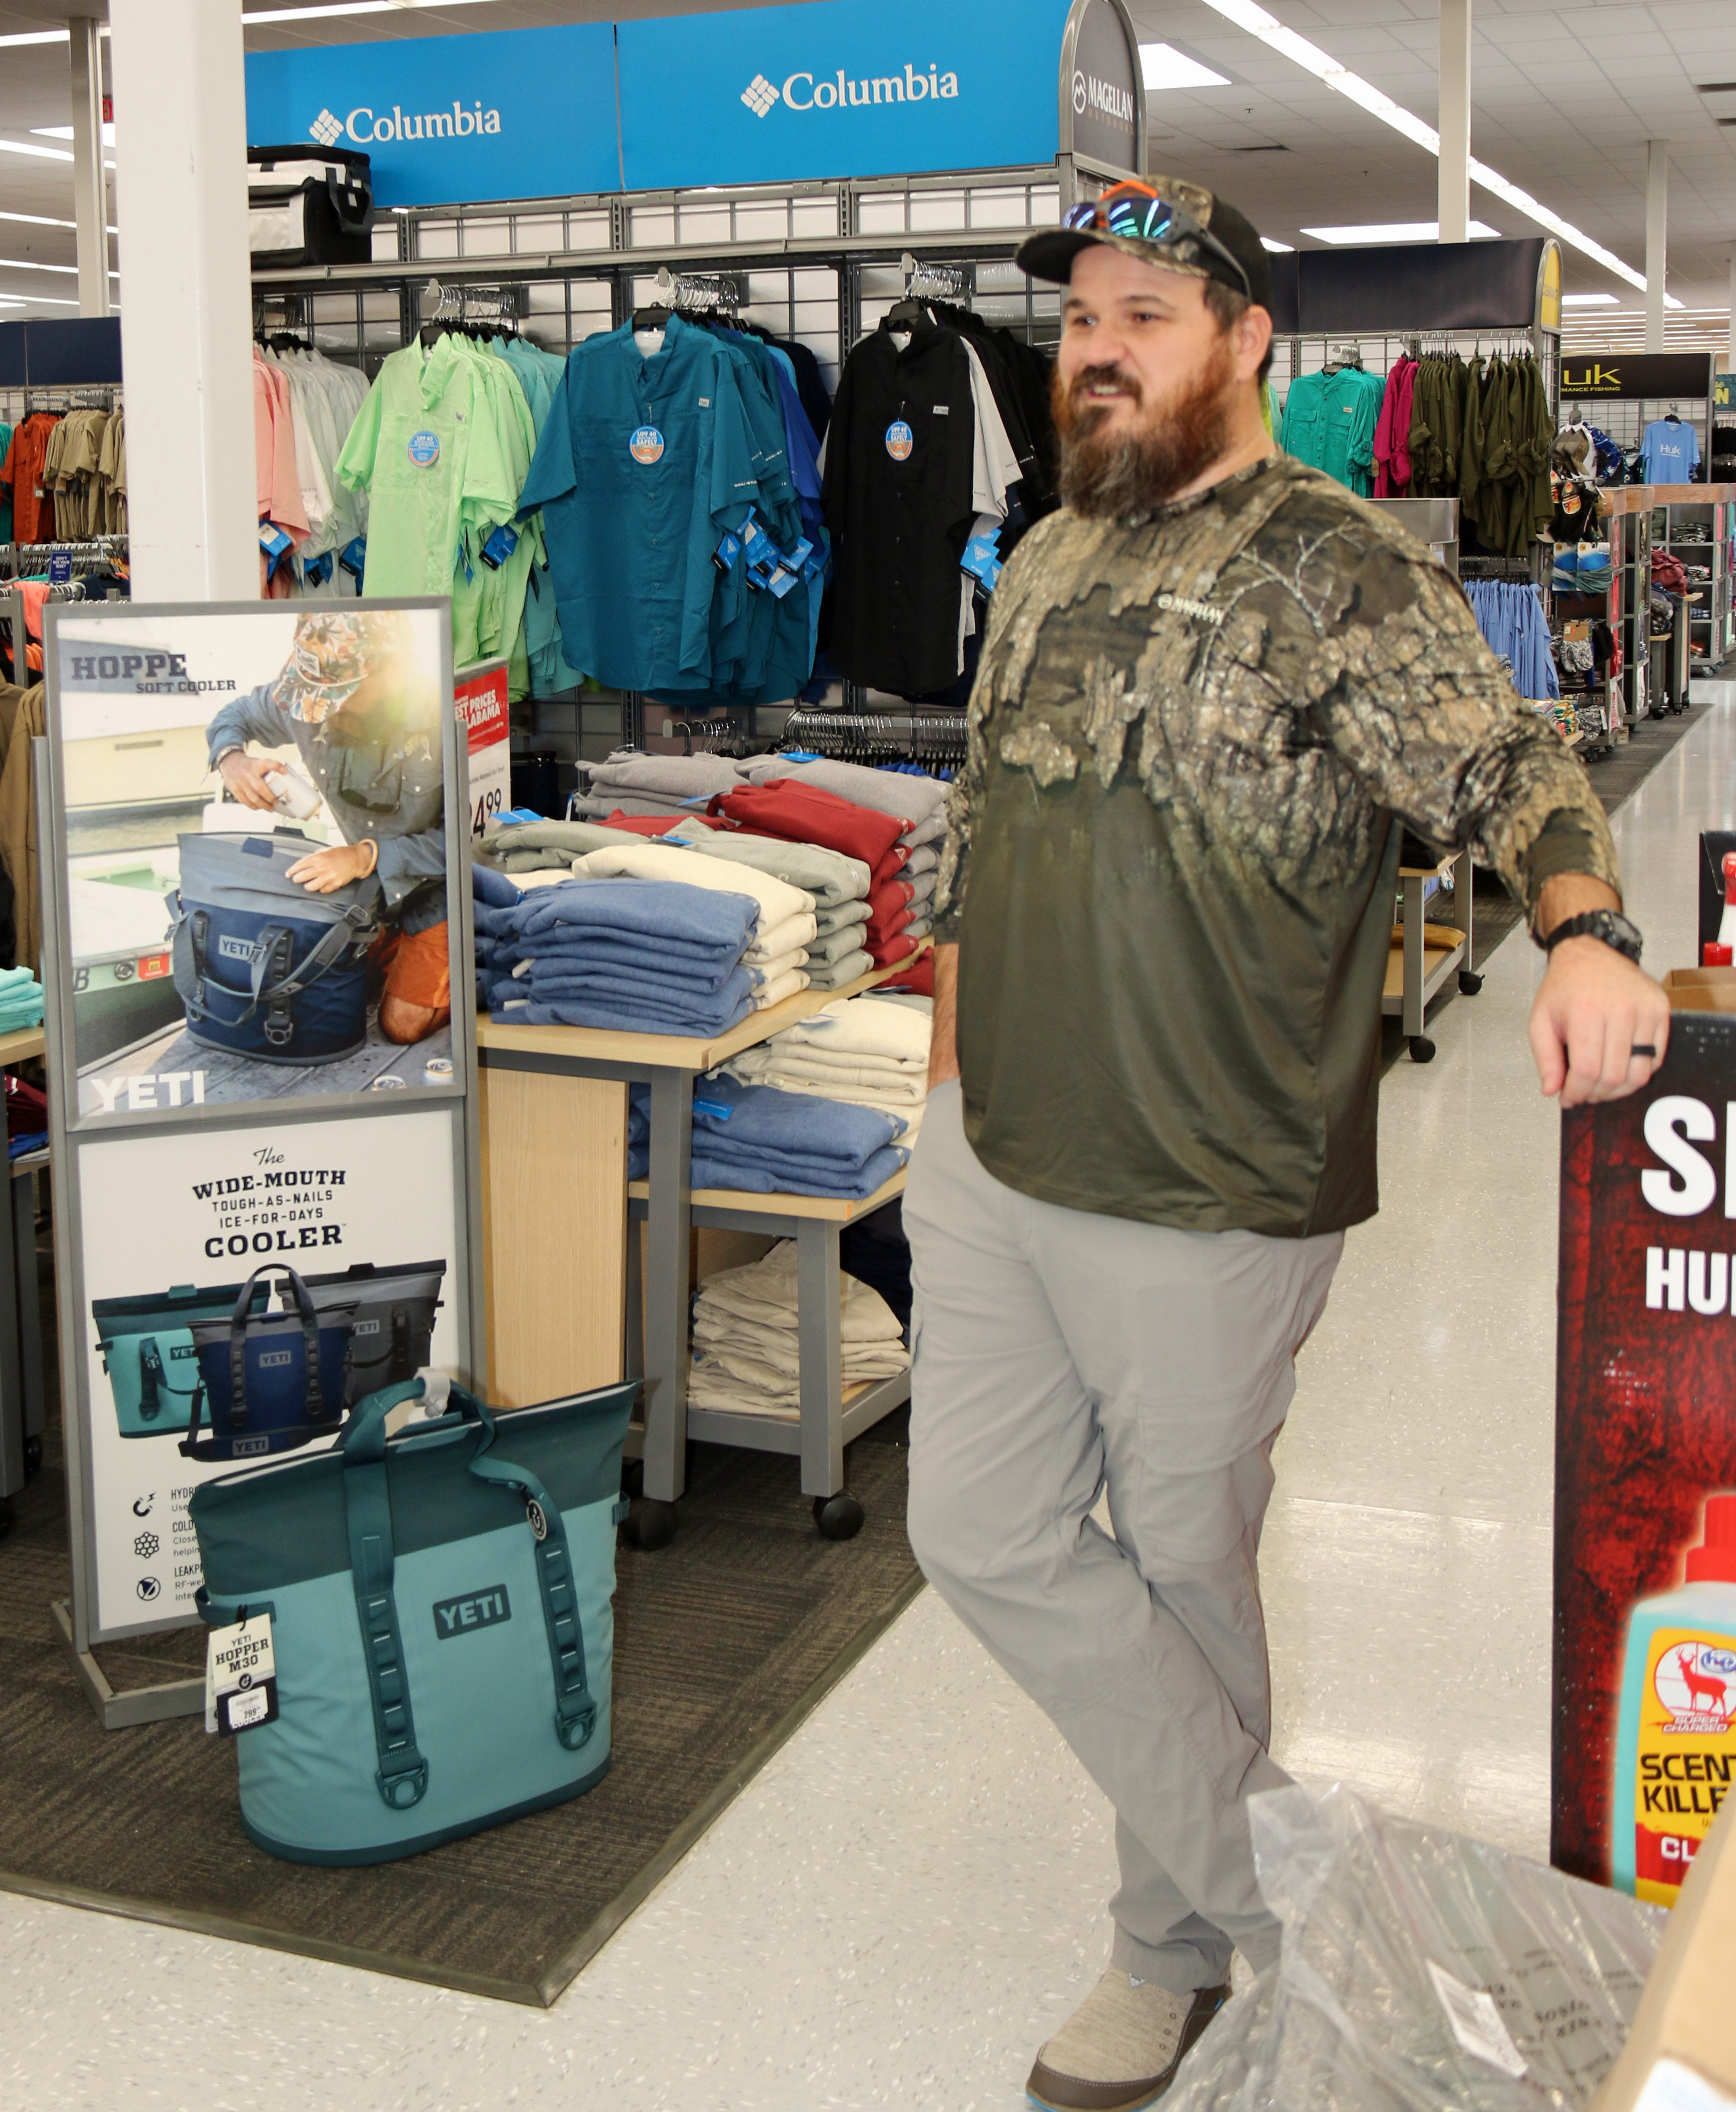 Justin Martin shares some cool hunting gift ideas that are sure to please this holiday season